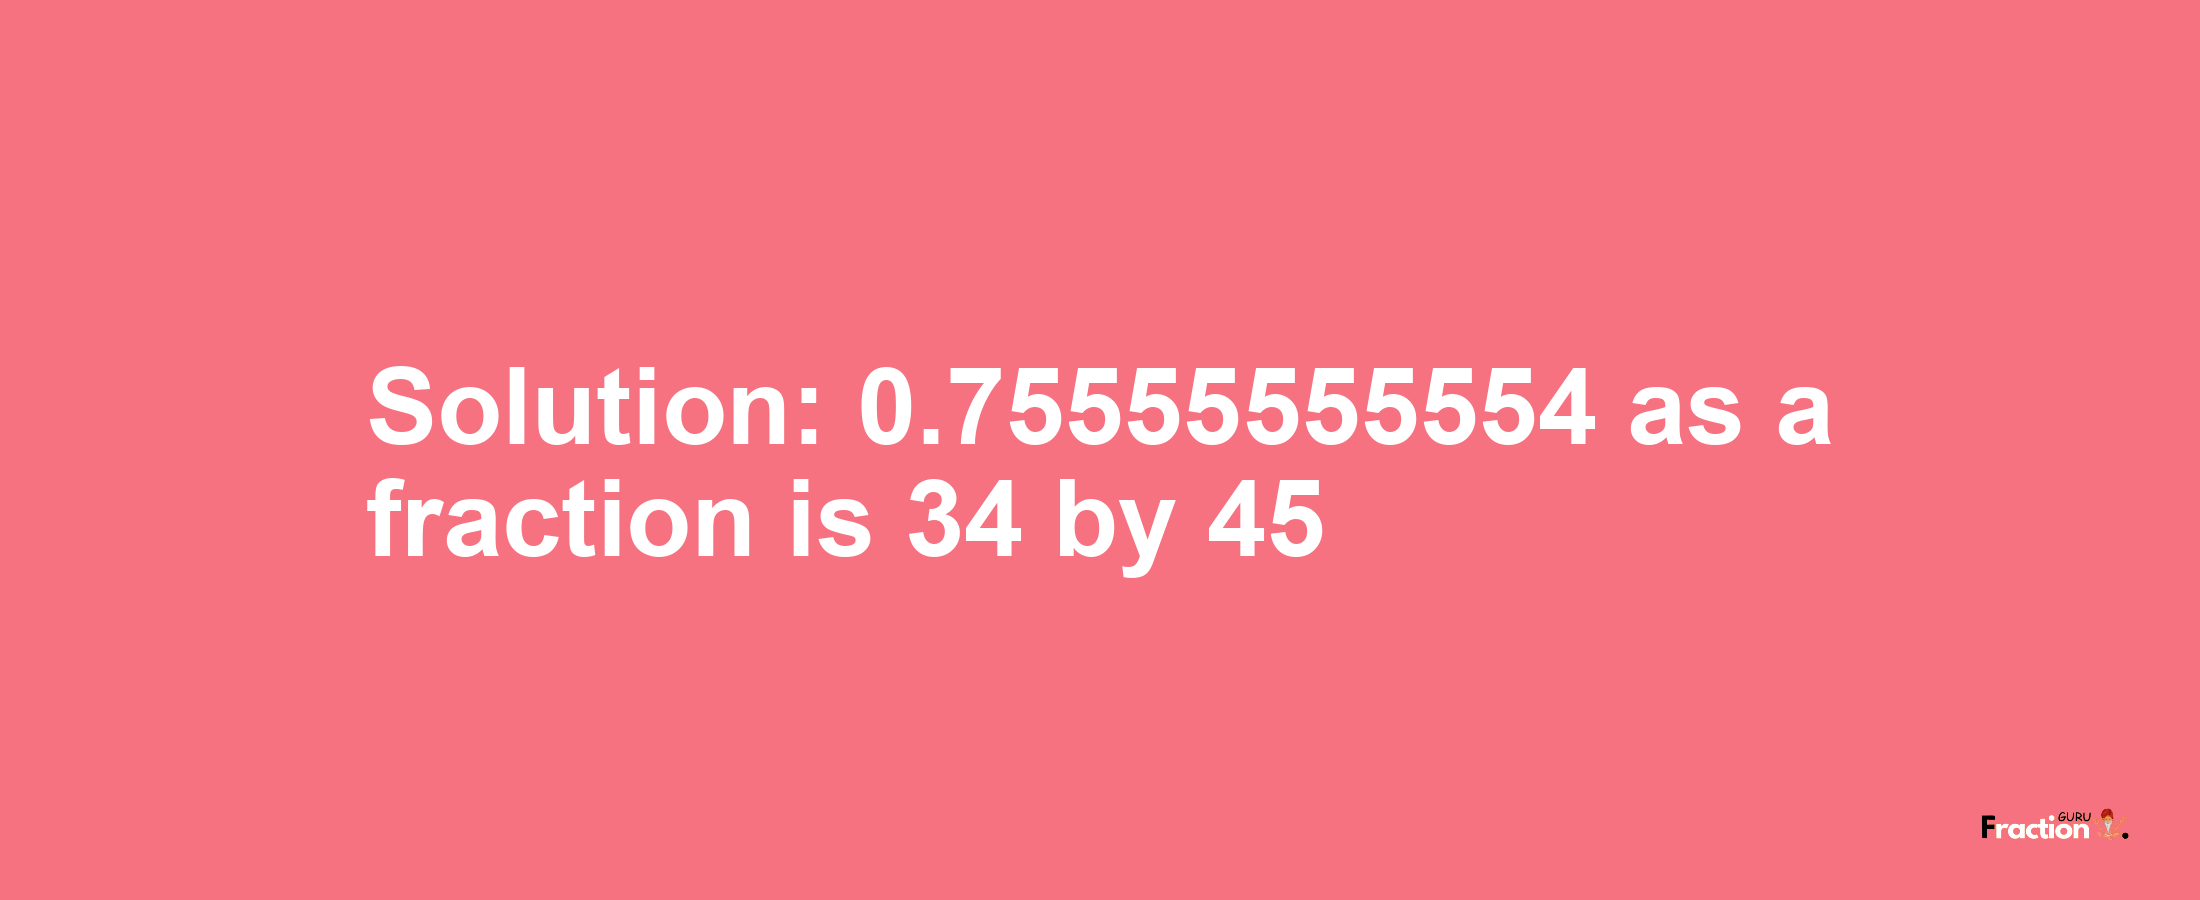 Solution:0.75555555554 as a fraction is 34/45